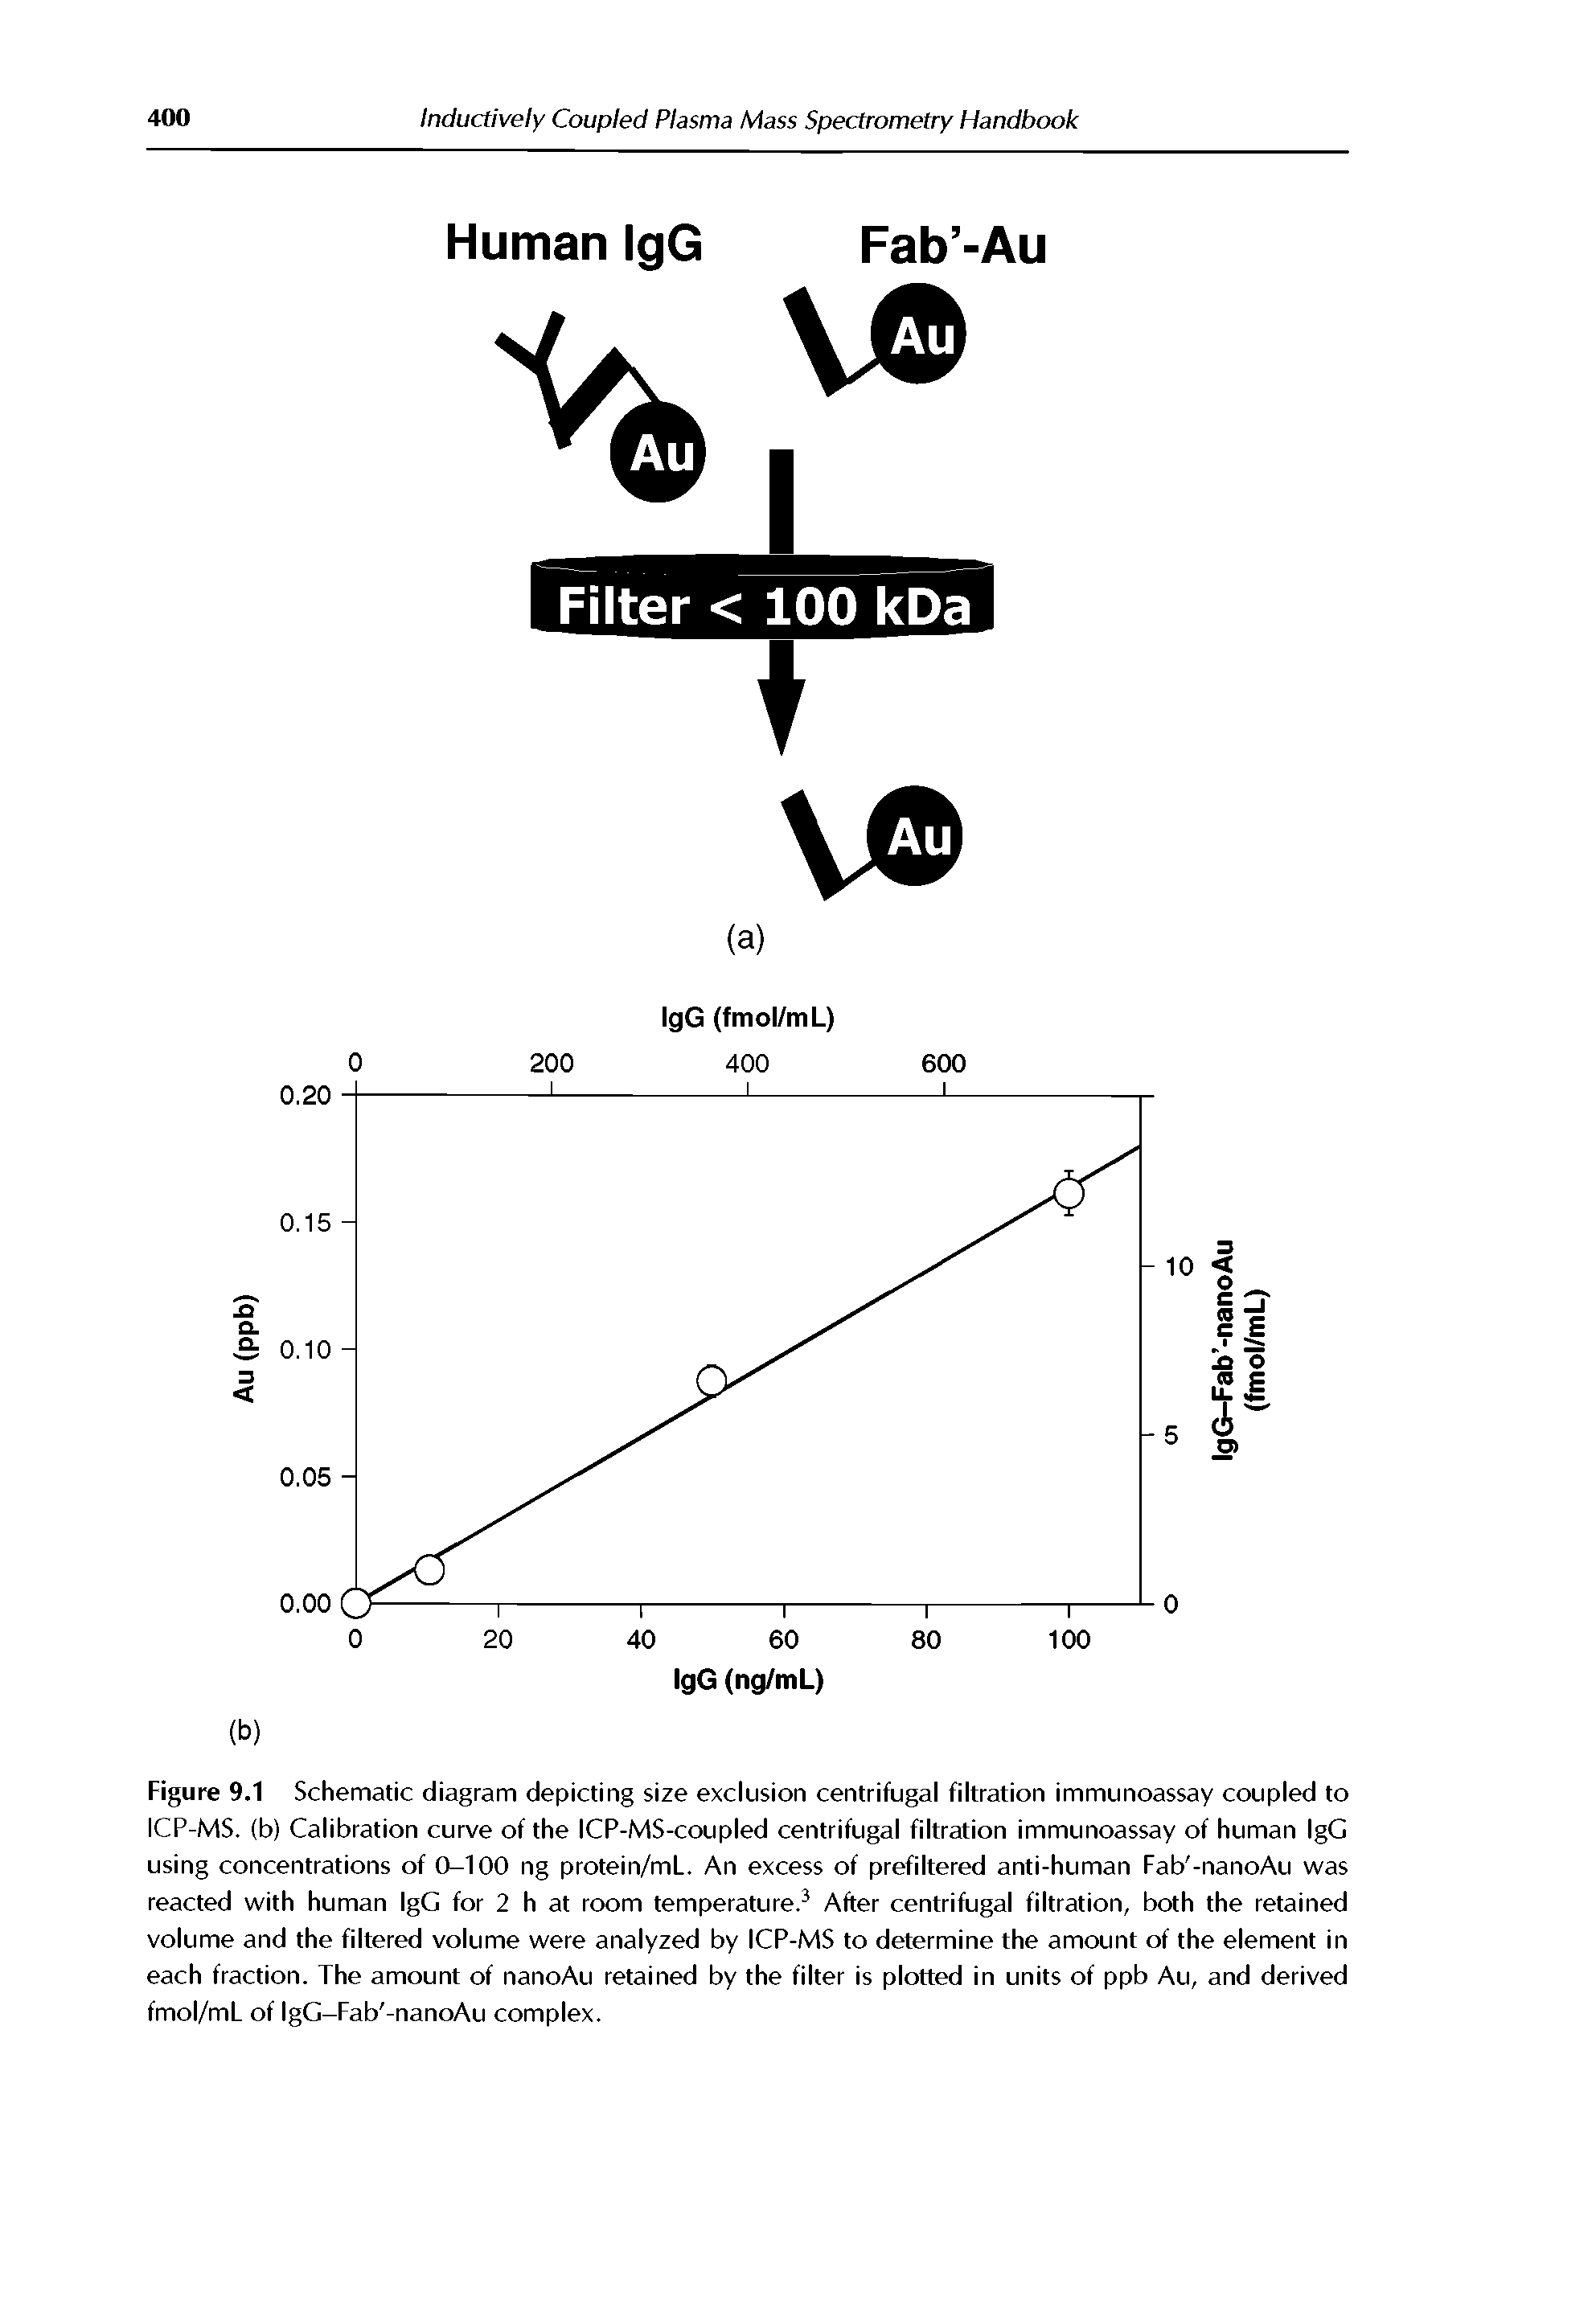 Figure 9.1 Schematic diagram depicting size exclusion centrifugal filtration immunoassay coupled to ICP-MS. (b) Calibration curve of the ICP-MSK oupled centrifugal filtration immunoassay of human IgG using concentrations of 0-100 ng protein/mL. An excess of prefiltered anti-human Fab -nanoAu was reacted with human IgG for 2 h at room temperature. After centrifugal filtration, both the retained volume and the filtered volume were analyzed by ICP-MS to determine the amount of the element in each fraction. The amount of nanoAu retained by the filter is plotted in units of ppb Au, and derived fmol/mL of IgG-Fab -nanoAu complex.